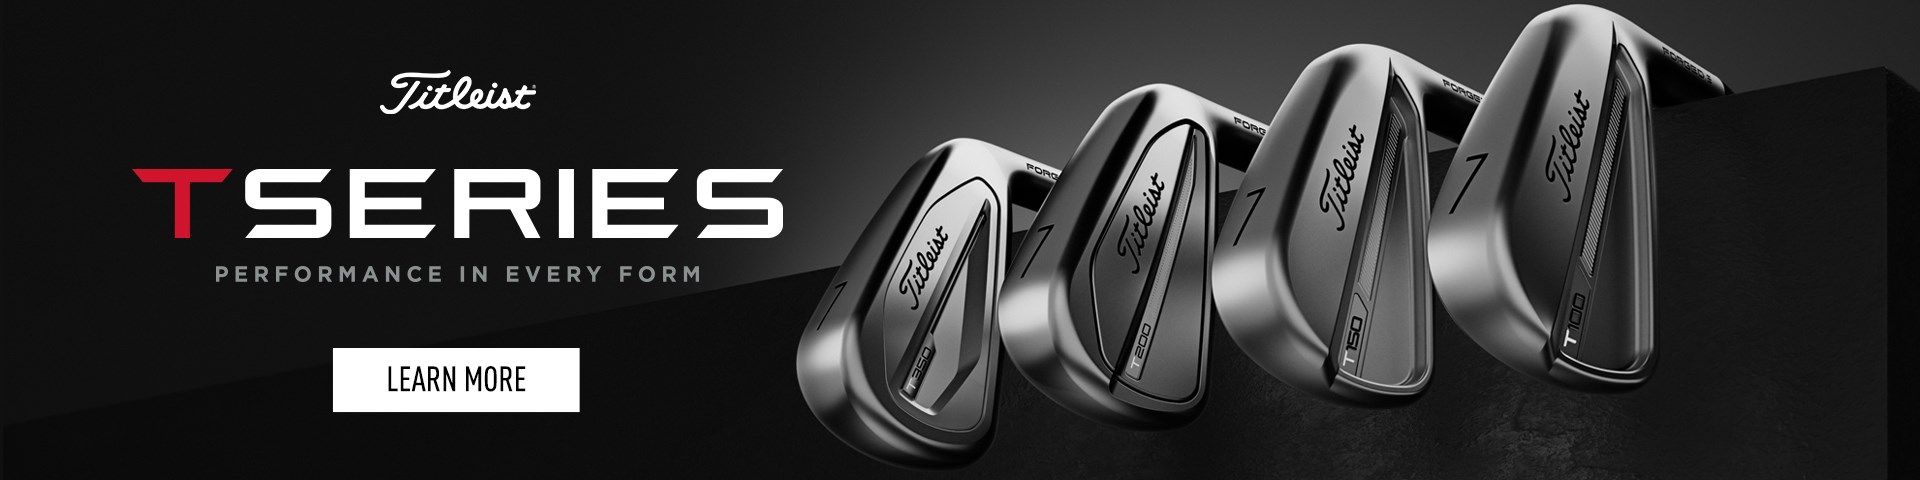 Banner the-new-titleist-t-series-golf-irons-performance-form-nd-801285251